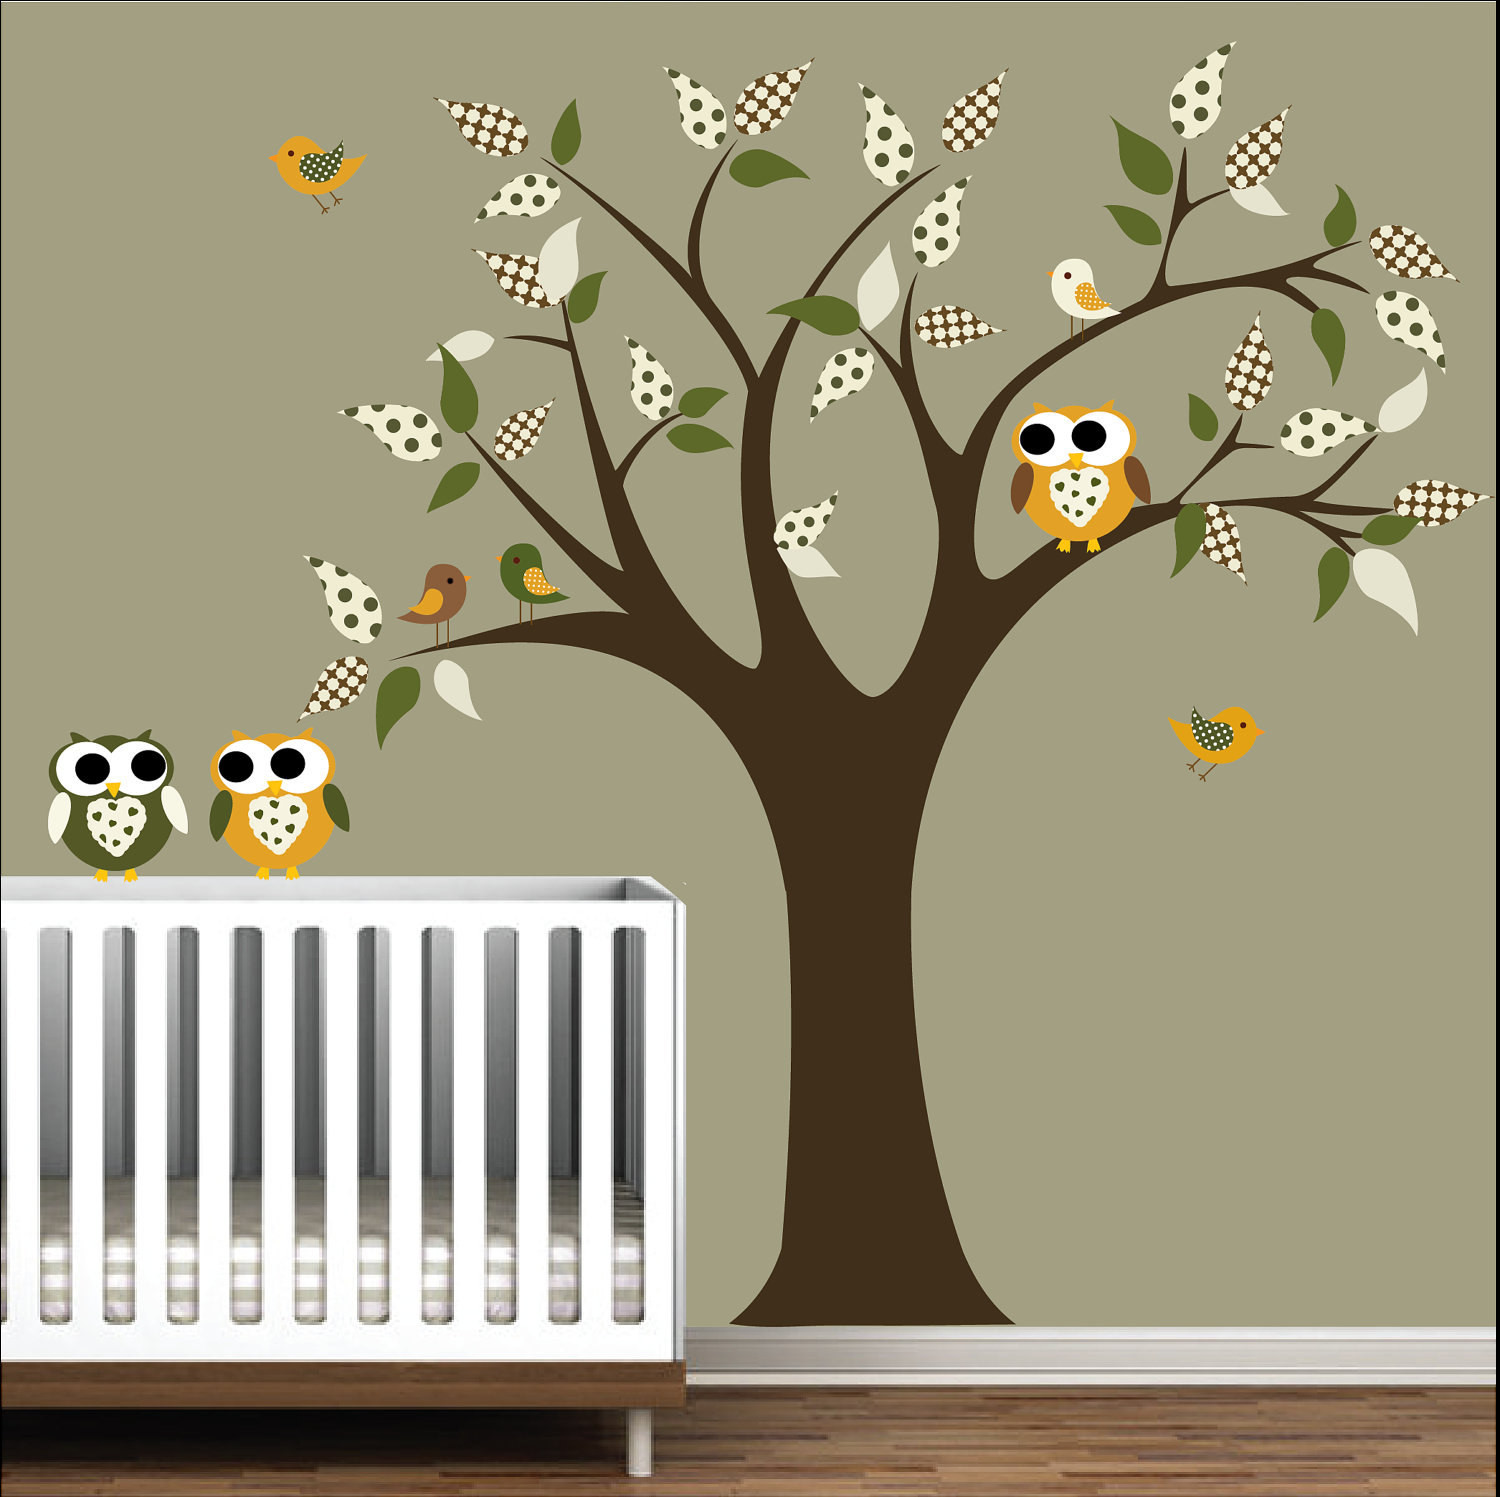 Tree Decals For Kids Room
 Nursery Tree Decal Wall Sticker Children Decals with